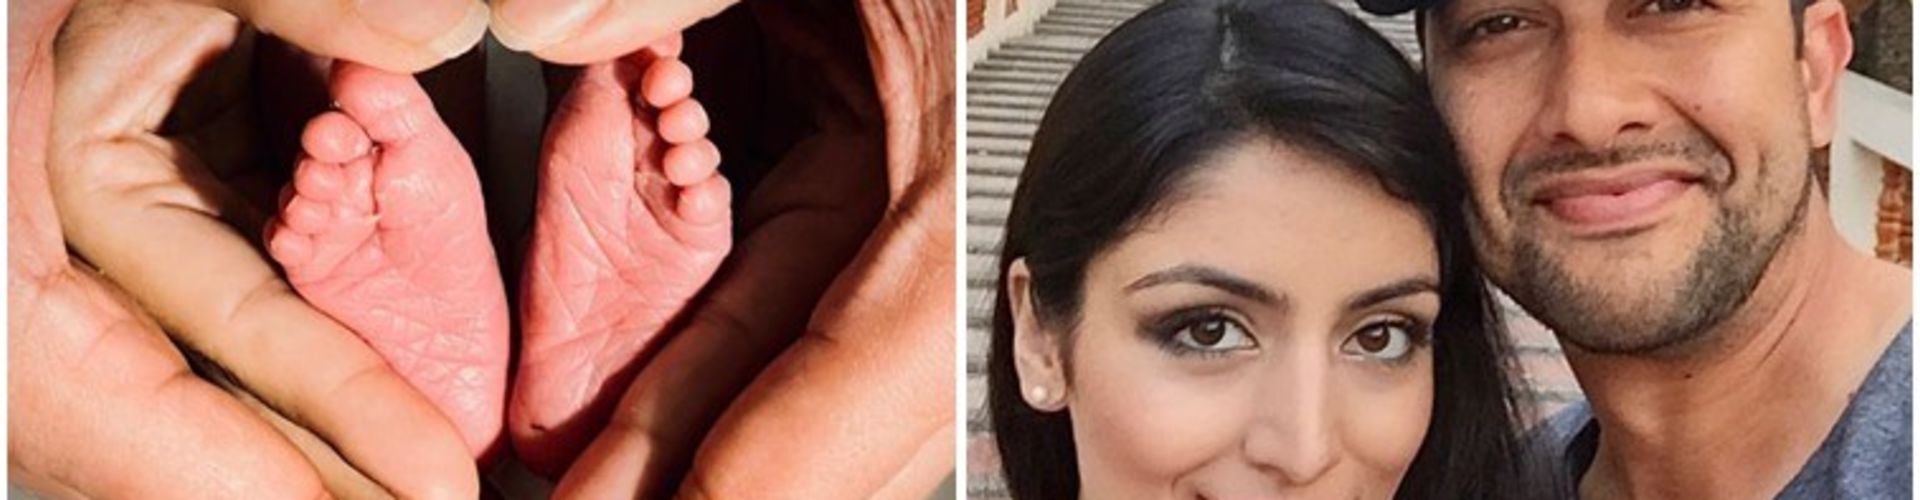 Aftab Shivdasani and wife Nin Dusanj welcomes their baby girl with a heartwarming picture